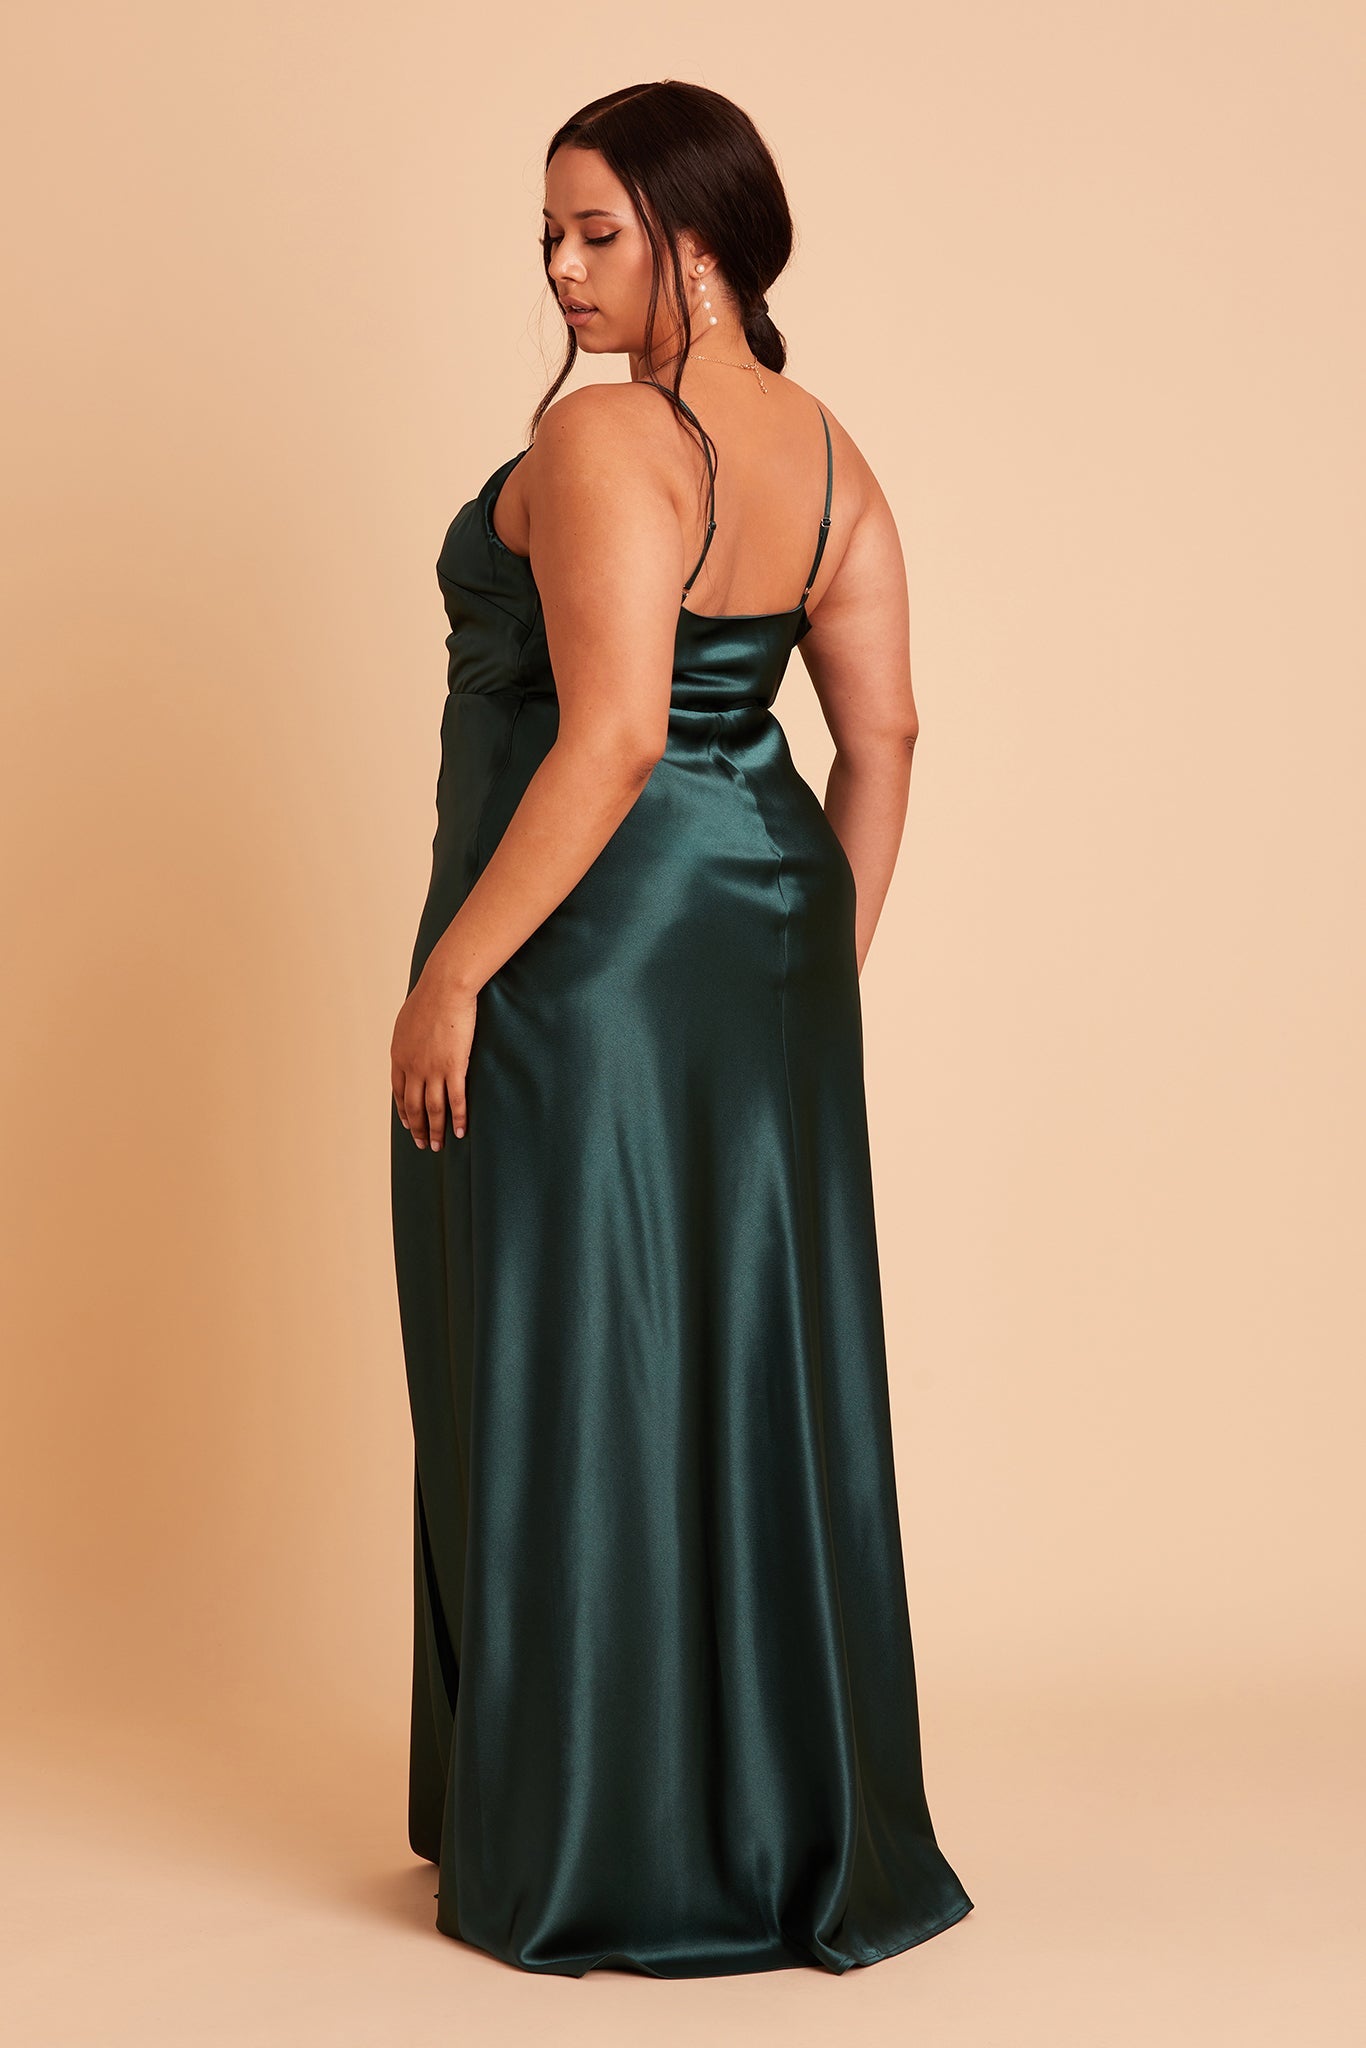 Back view of the Lisa Long Dress Curve in emerald satin shows the back of the dress with adjustable spaghetti straps and a smooth fit in the bodice and waist that attach to a full length skirt.  